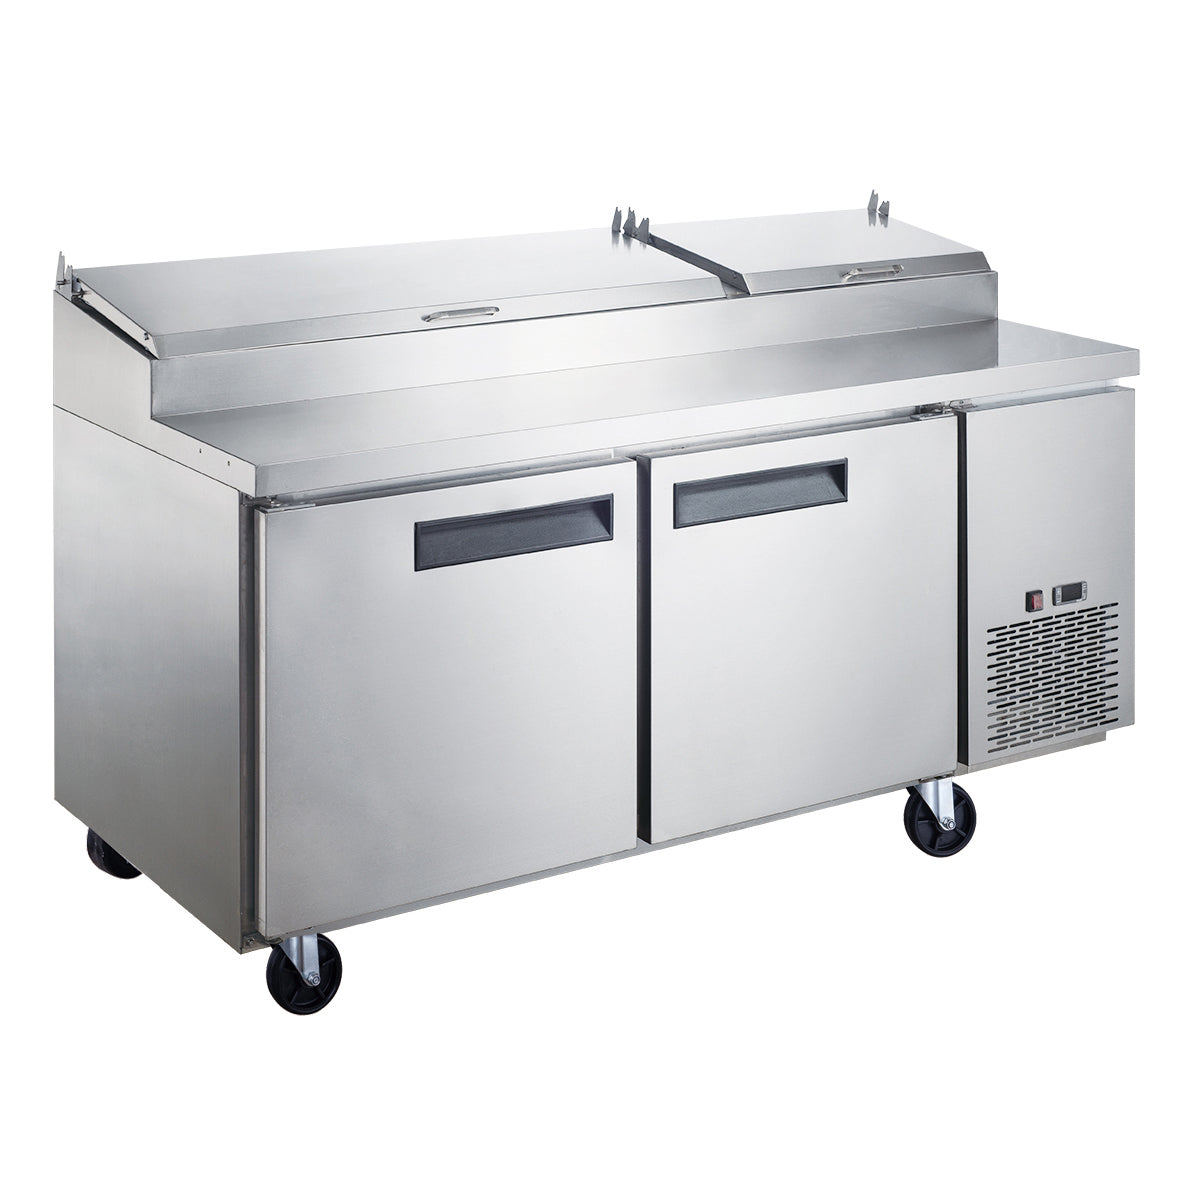 Chef AAA - TPPT-71-HC, Commercial 70" Pizza Prep Table Refrigerator 9 Pans 2 Door Stainless Steel 17.5 cu.ft.